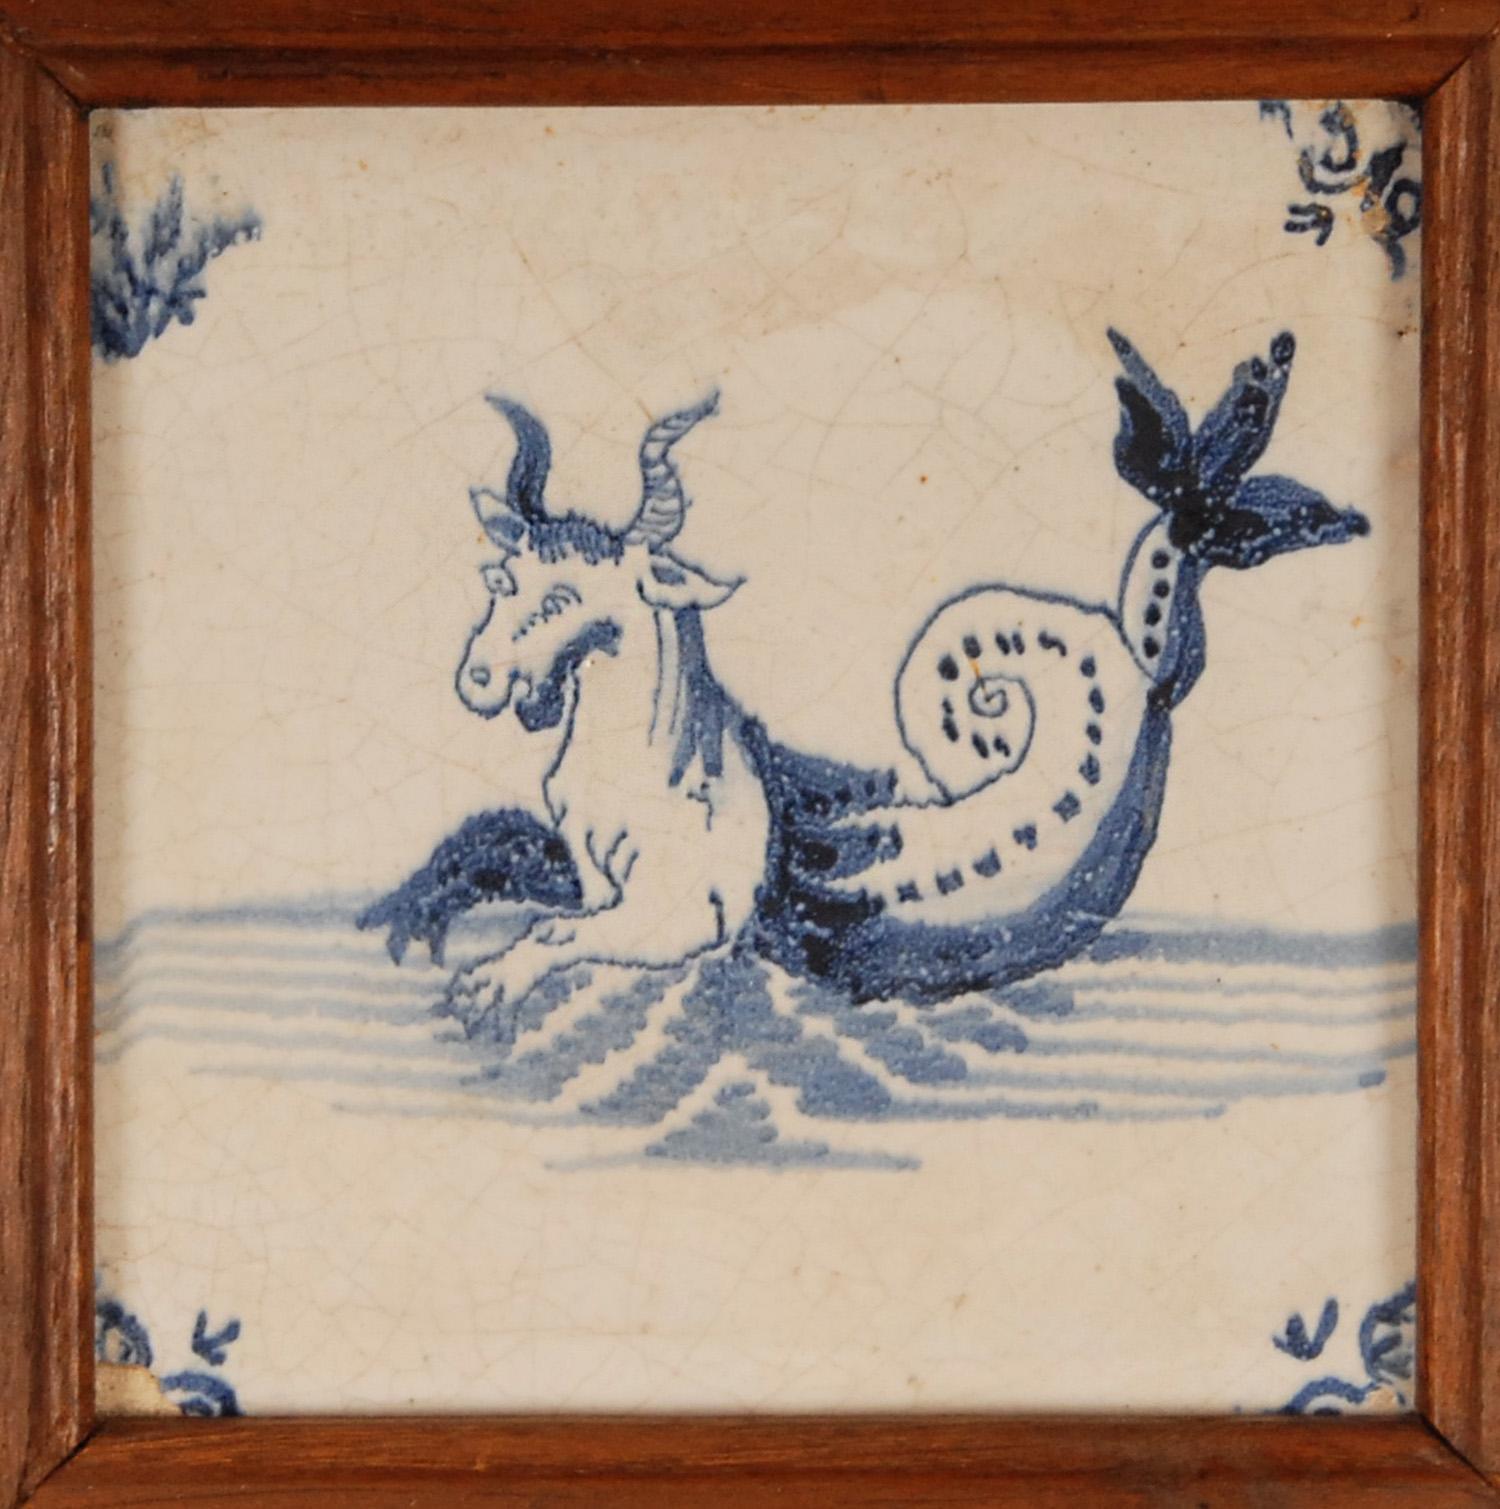 Hand-Crafted 18th Century Delft Tiles Oak Framed Blue and White Mermaid Dutch Delftware Tiles For Sale